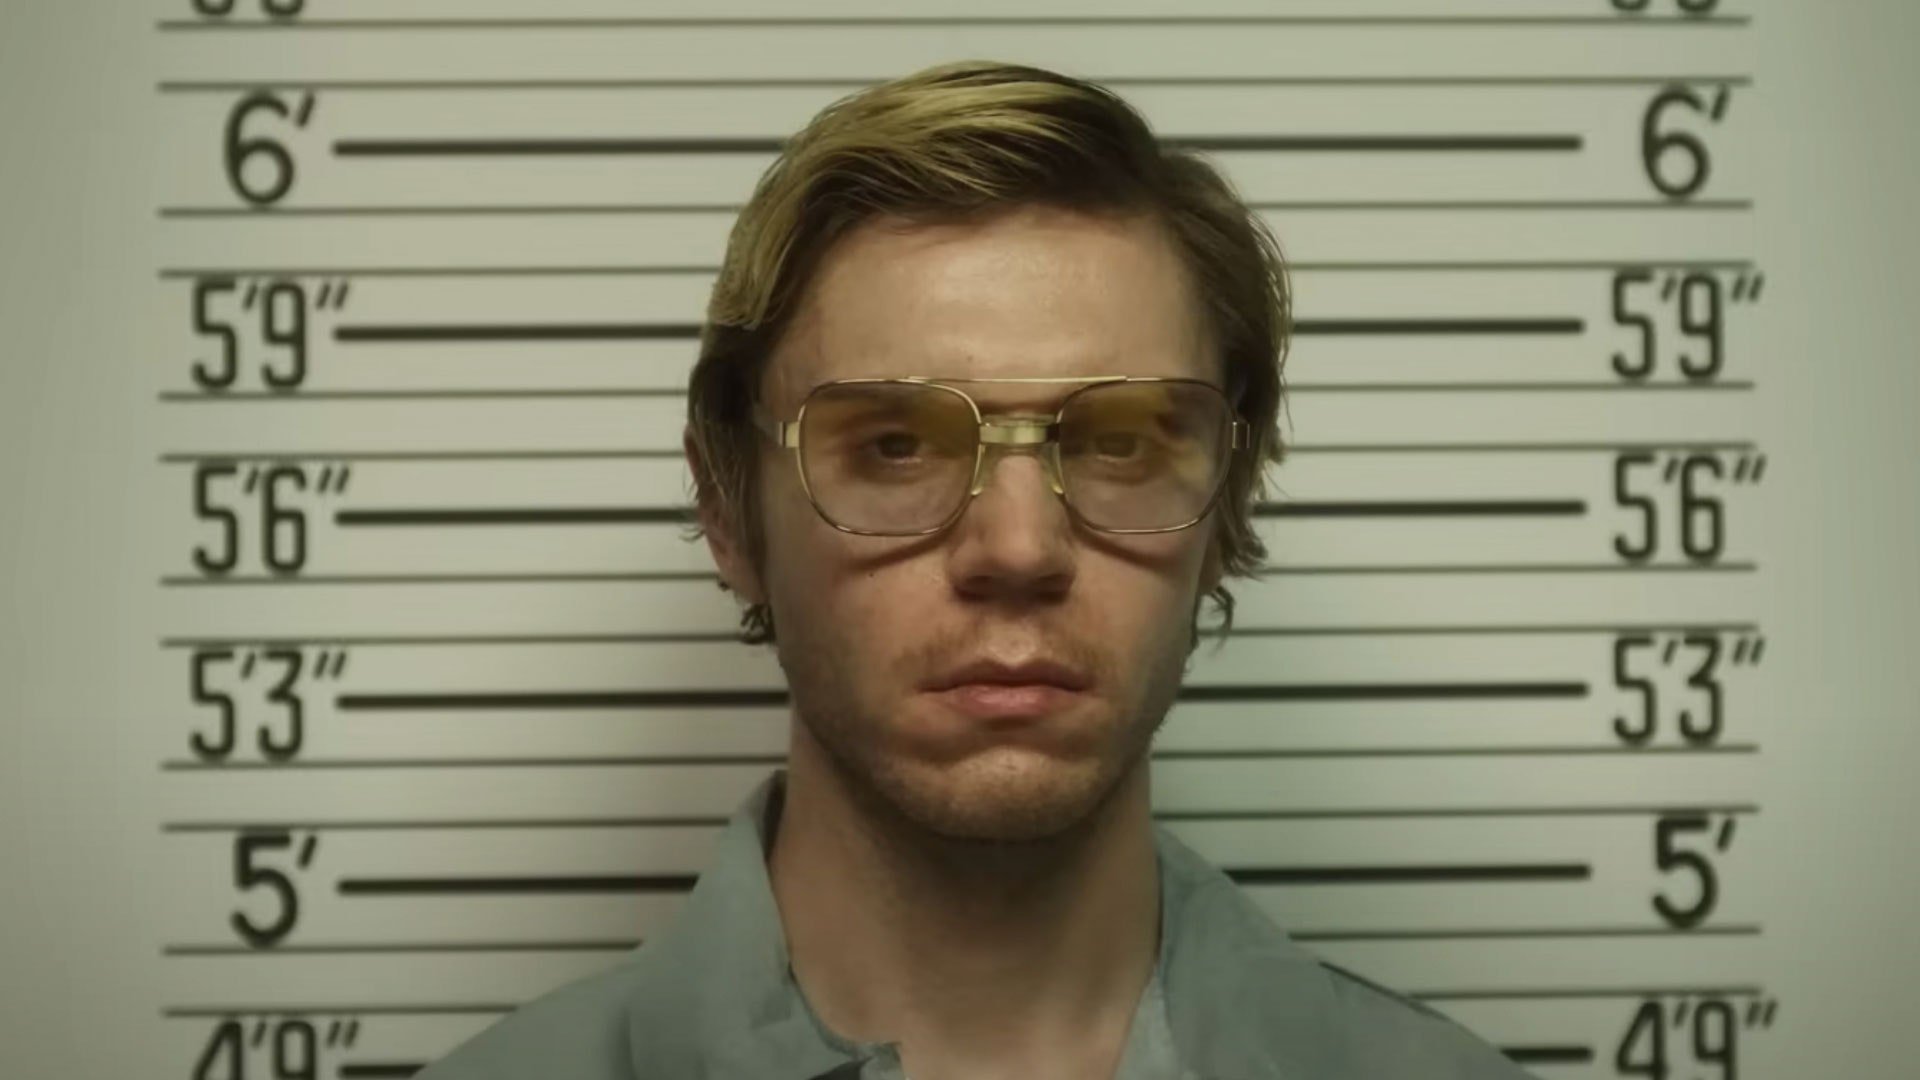 Netflix's Monster: The Jeffrey Dahmer Story is a hit. But is it fair to make shows on serial killers?